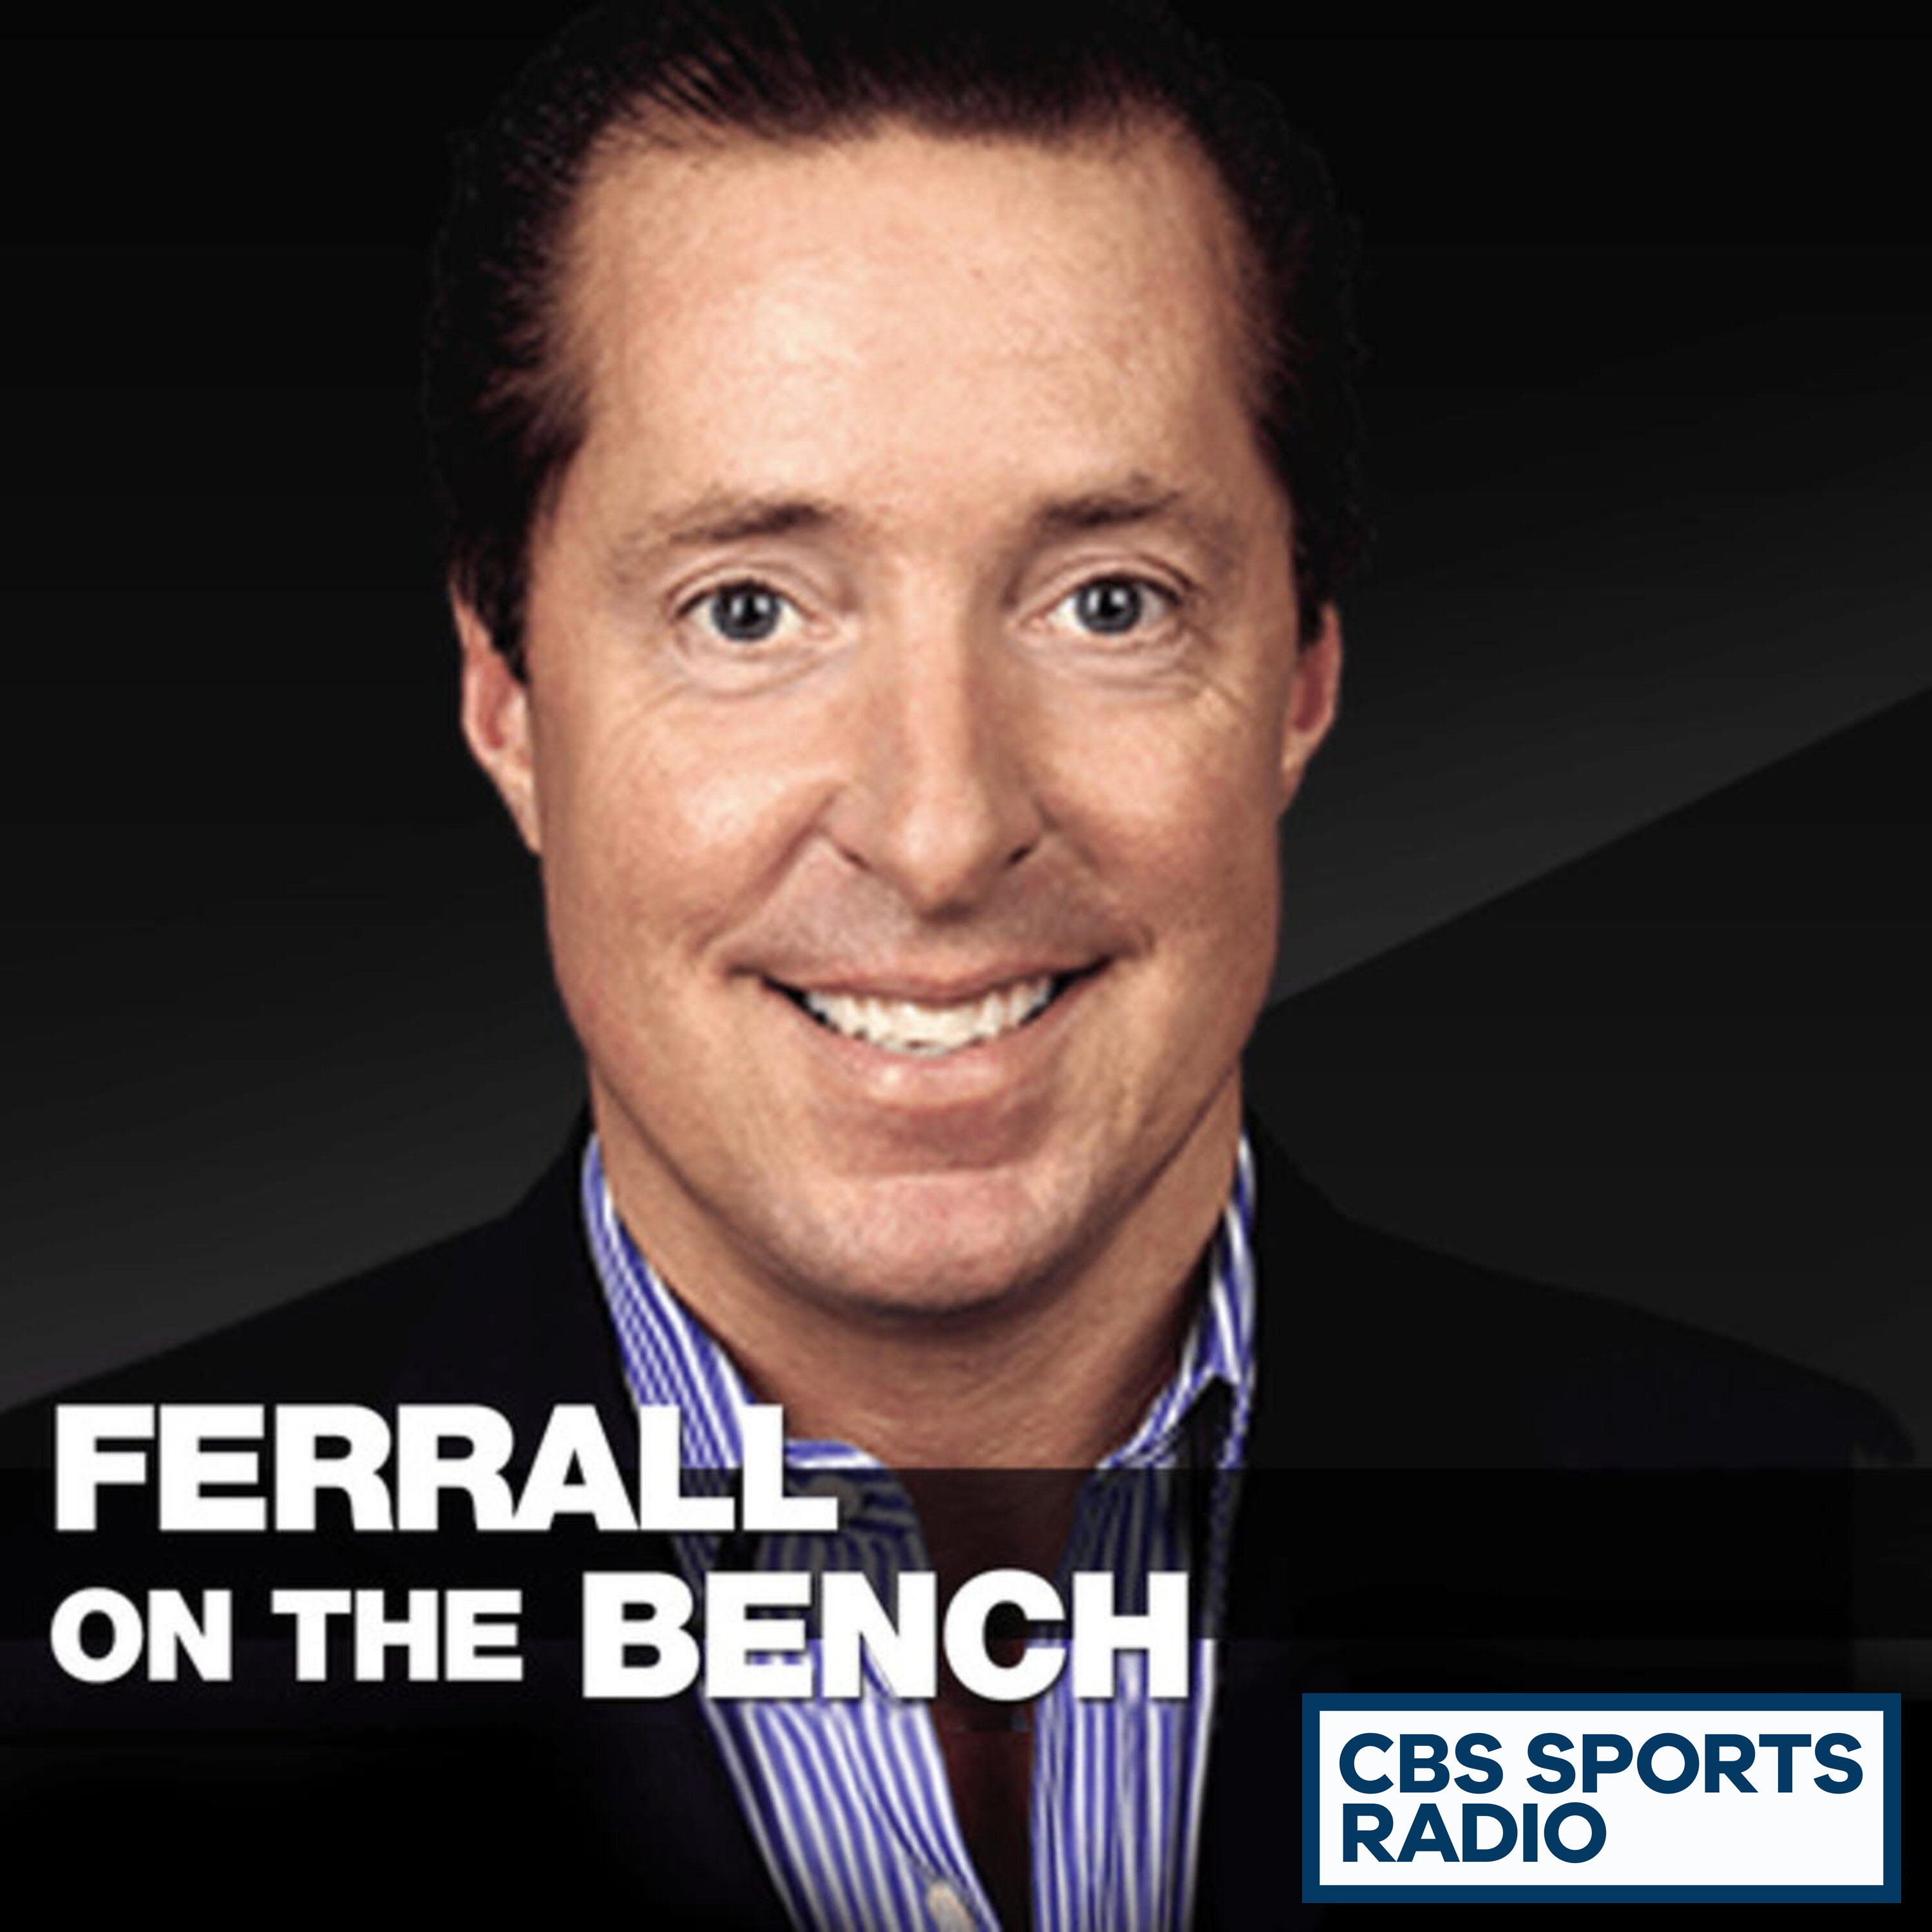 01-01-20 - Ferrall On The Bench - Ferrall on NFL Coaching Changes